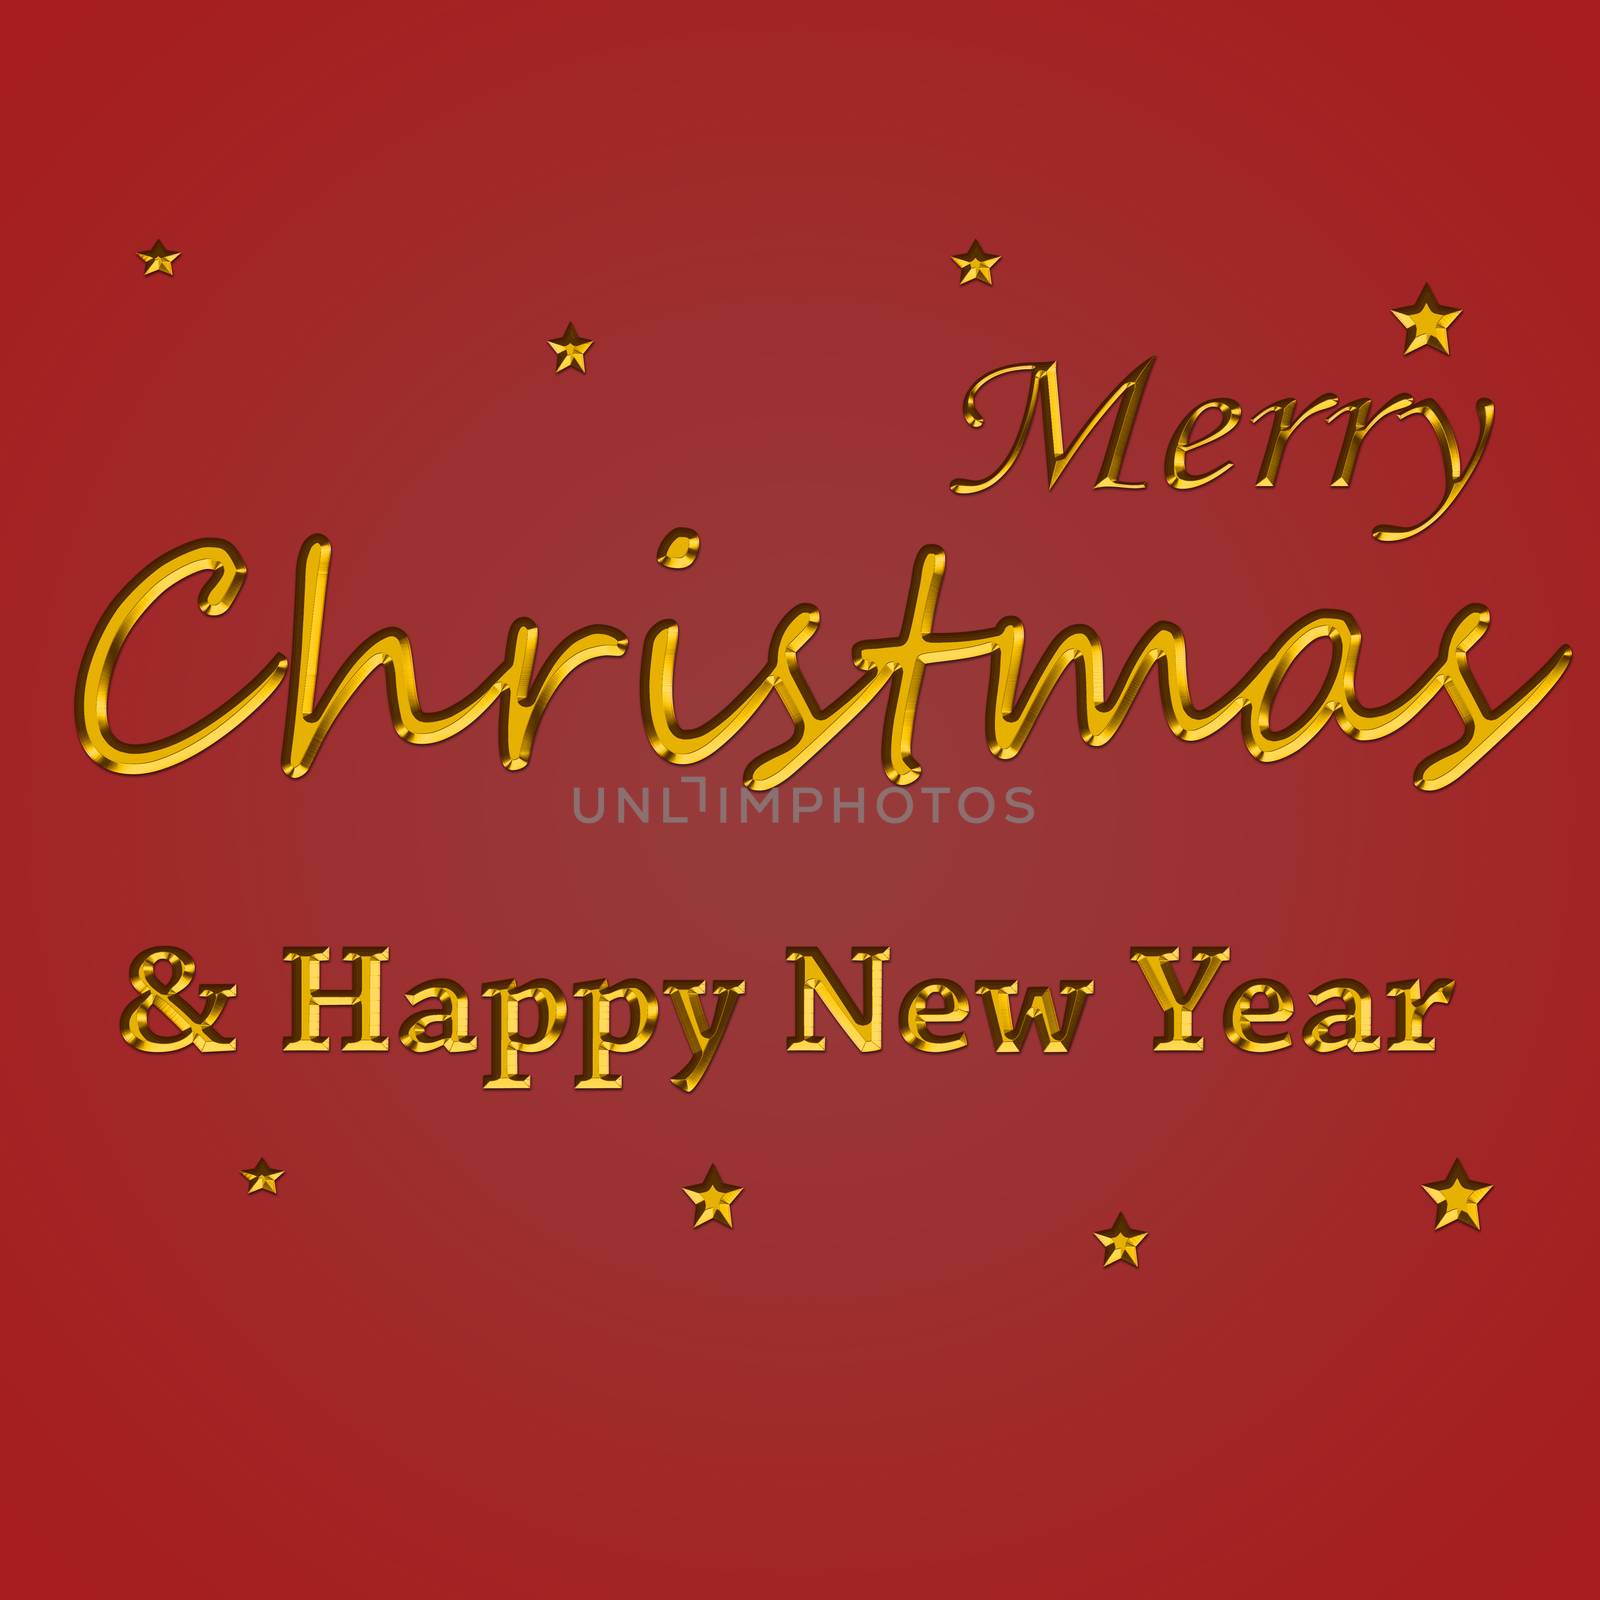 Golden text on red background. Merry Christmas and Happy New Year lettering template. Greeting card invitation on red background. 